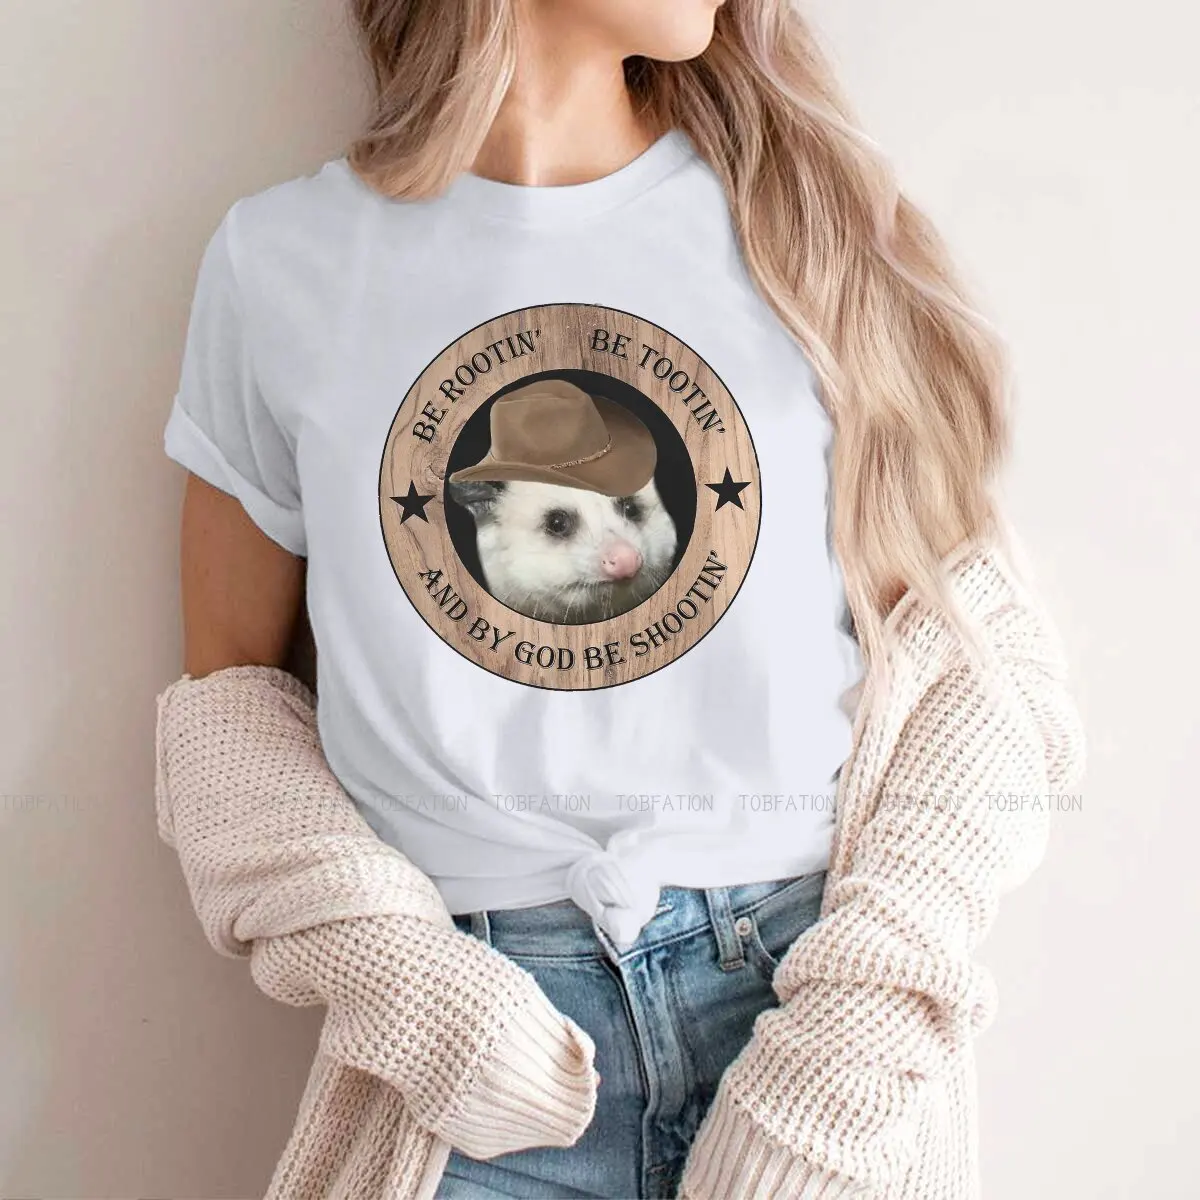 Rootin Tootin Cowboy Classic  Special TShirt for Girl Opossum Mouse Animal Comfortable New Design Gift Idea  T Shirt Stuff